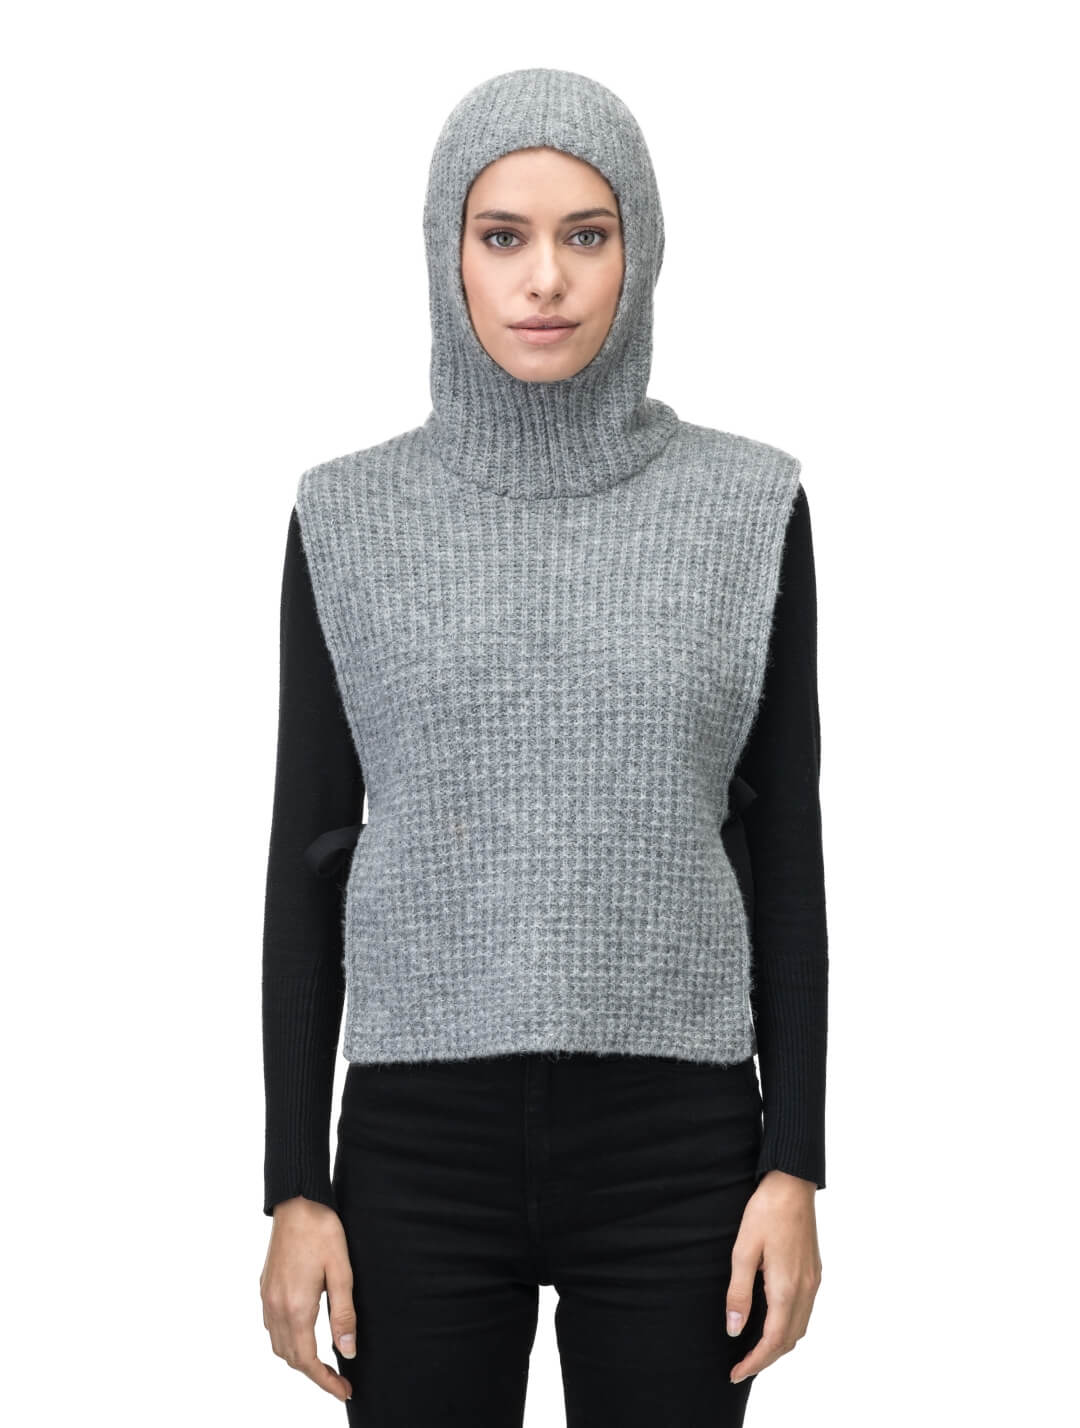 Nars Unisex Knit Hooded Dickie in in superfine alpaca and merino wool blend, waist length, fitted hood, sleeveless torso, and side webbing straps to adjust fit, in Grey Melange